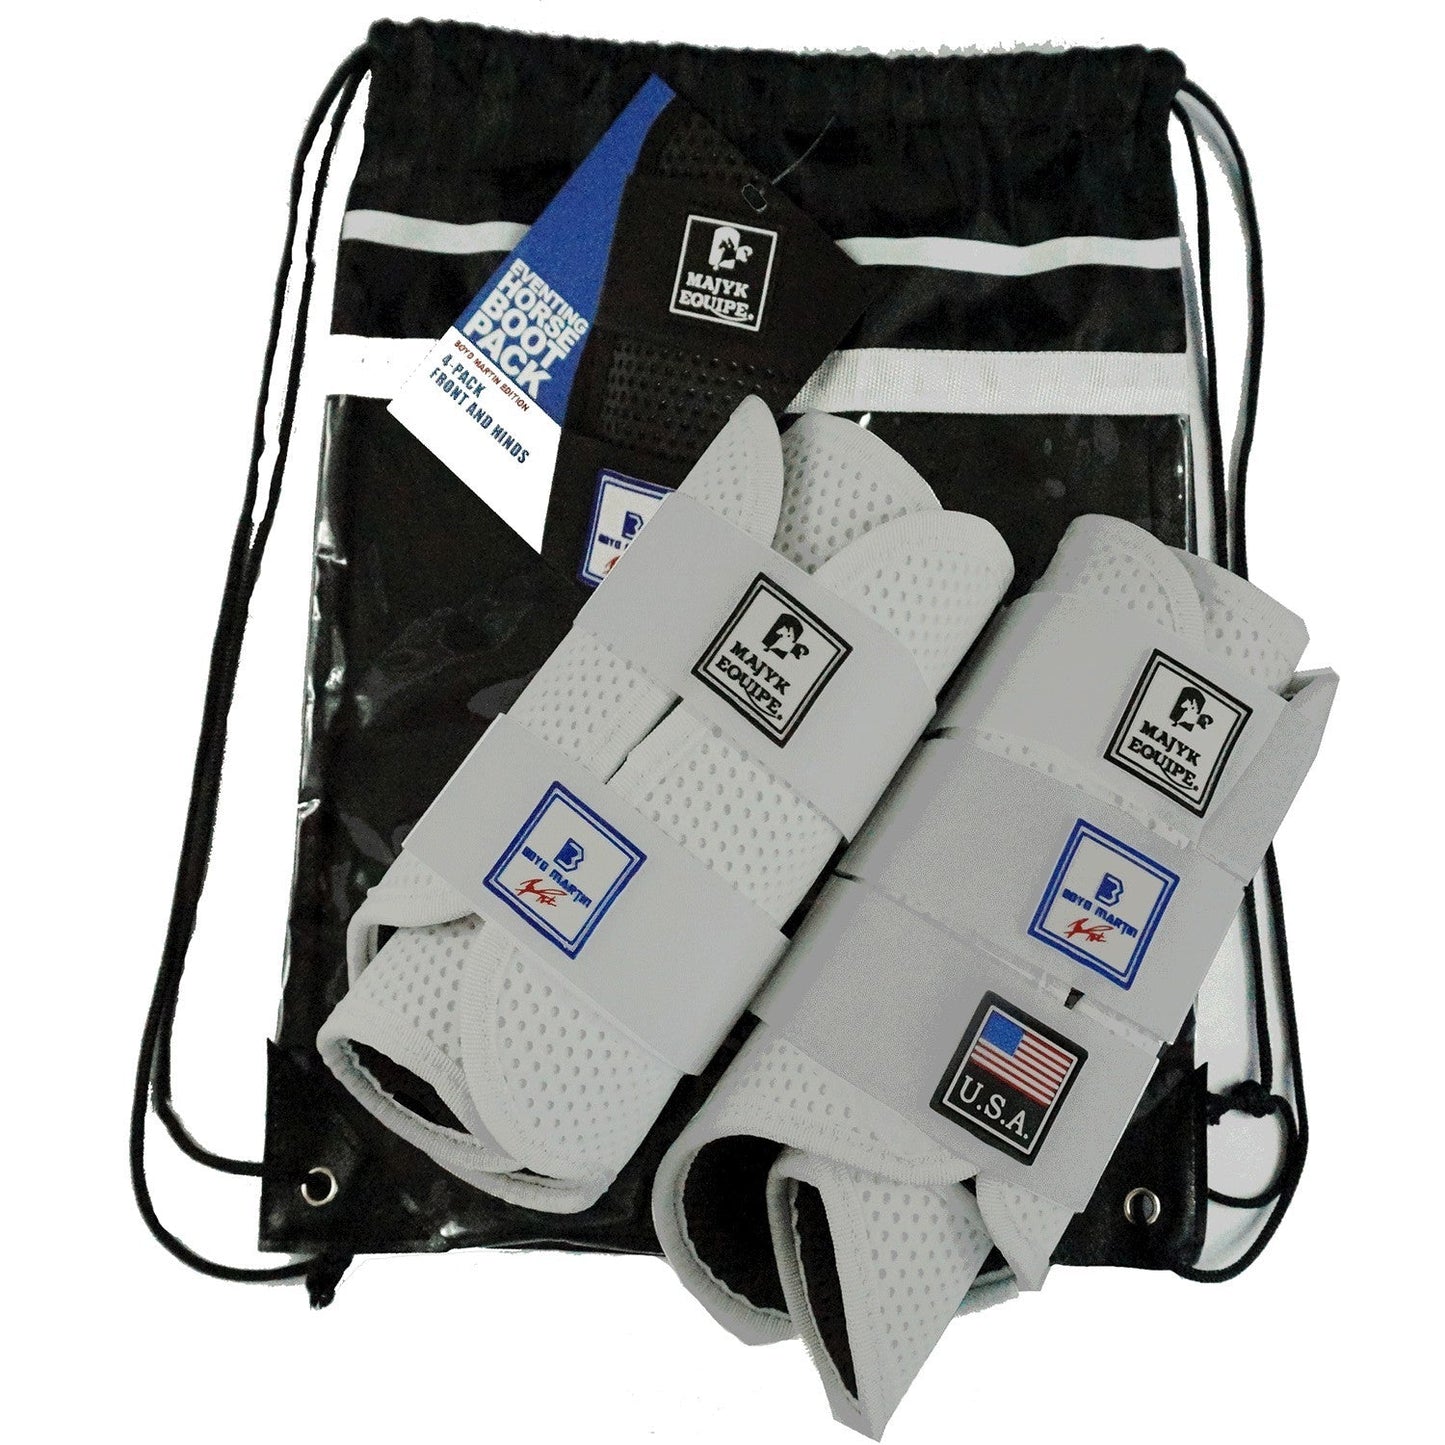 Majyk Equipe Eventing 4 Pack, Boyd Martin Series Generation 2